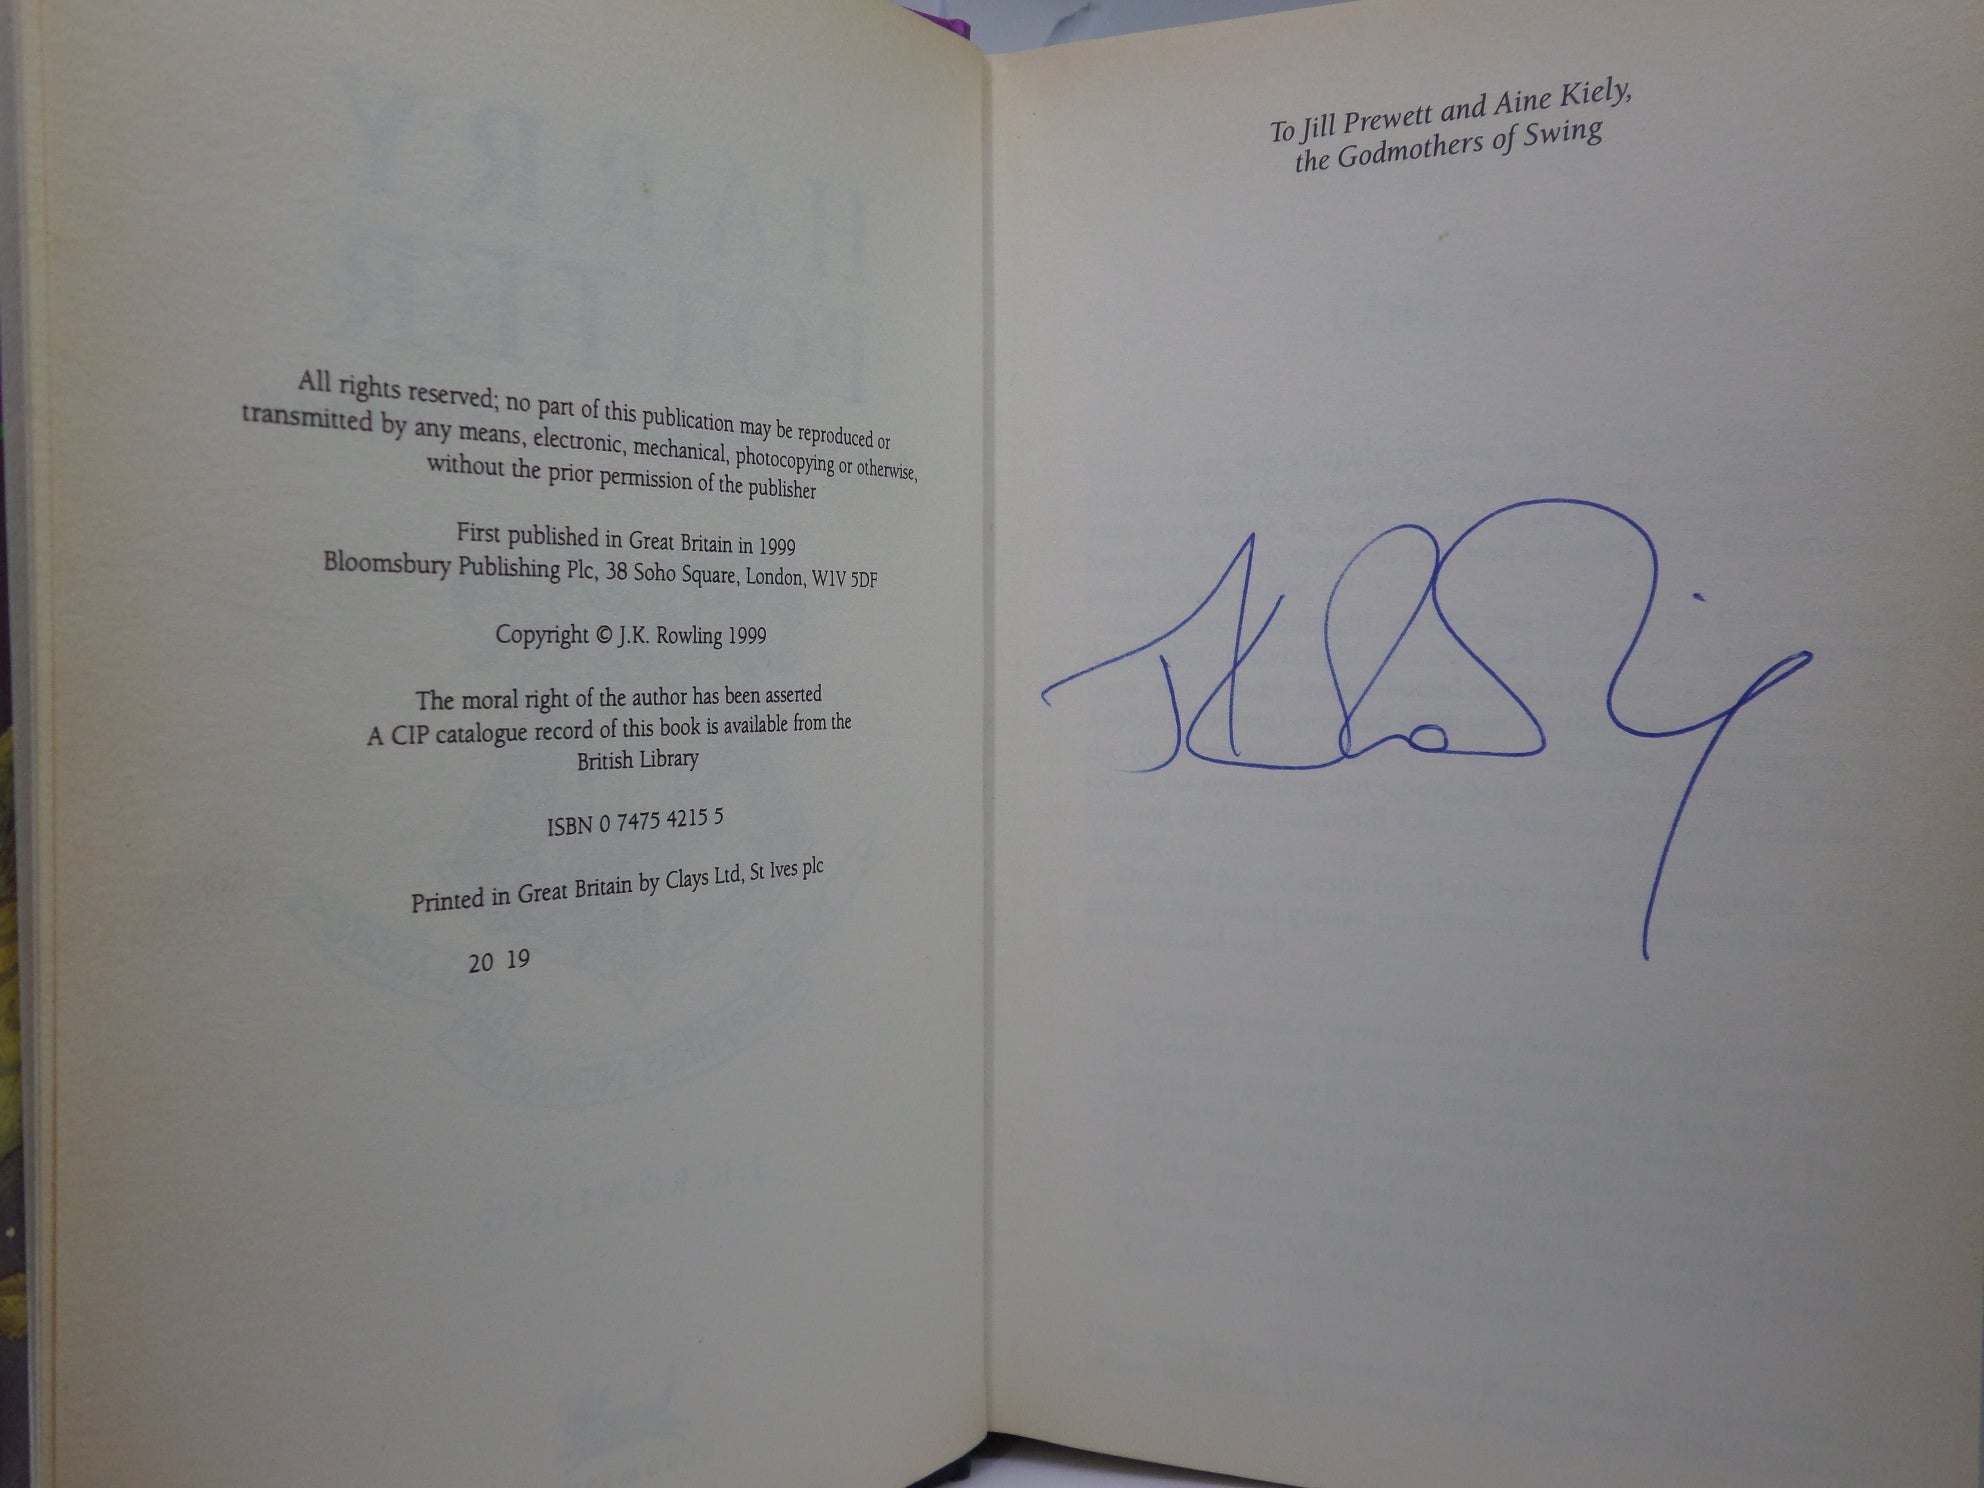 HARRY POTTER AND THE PRISONER OF AZKABAN 1999 SIGNED BY J.K. ROWLING